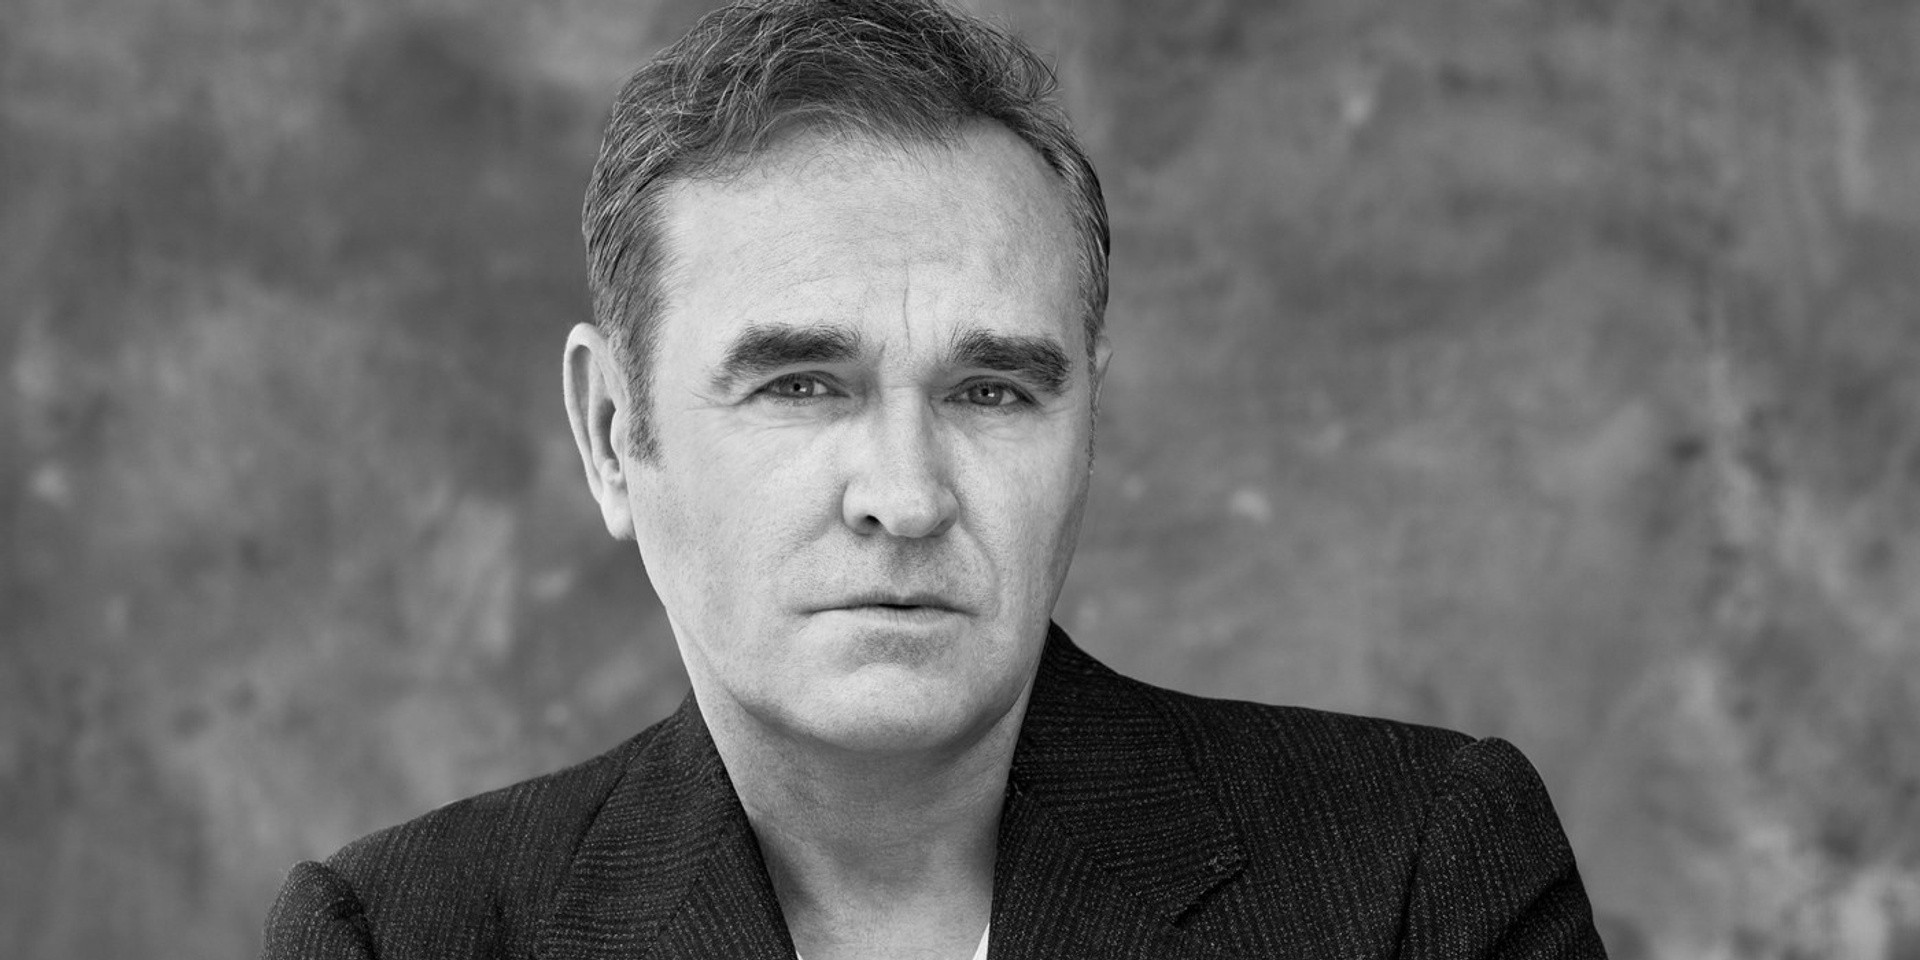 Seems like Morrissey is coming to Singapore after all